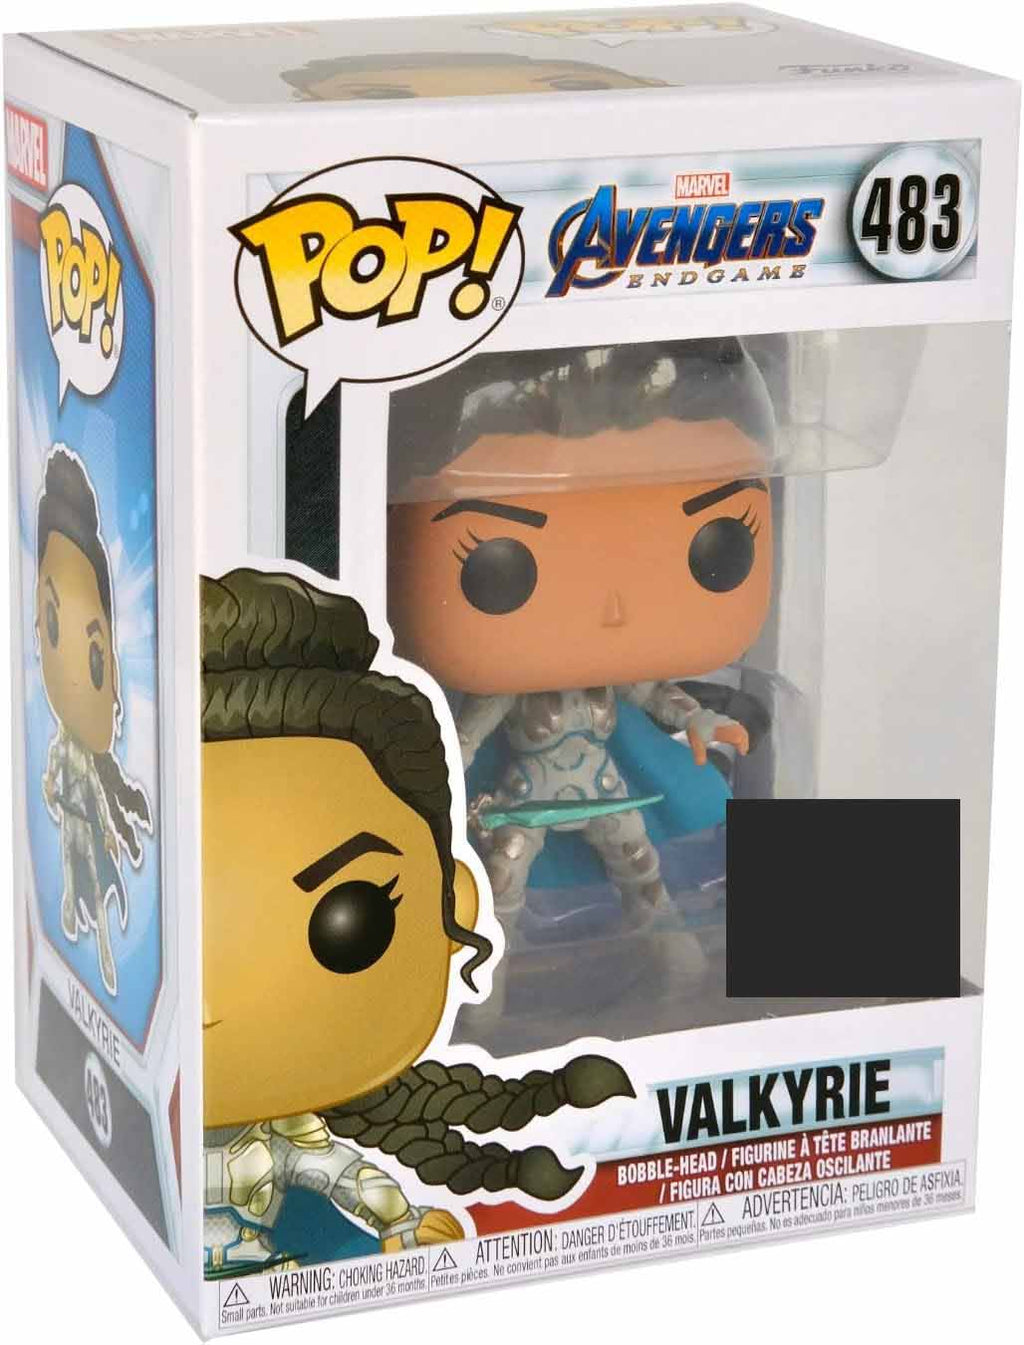 Pop Marvel Avengers Endgame 3.75 Inch Action Figure Exclusive - Valkyrie #483